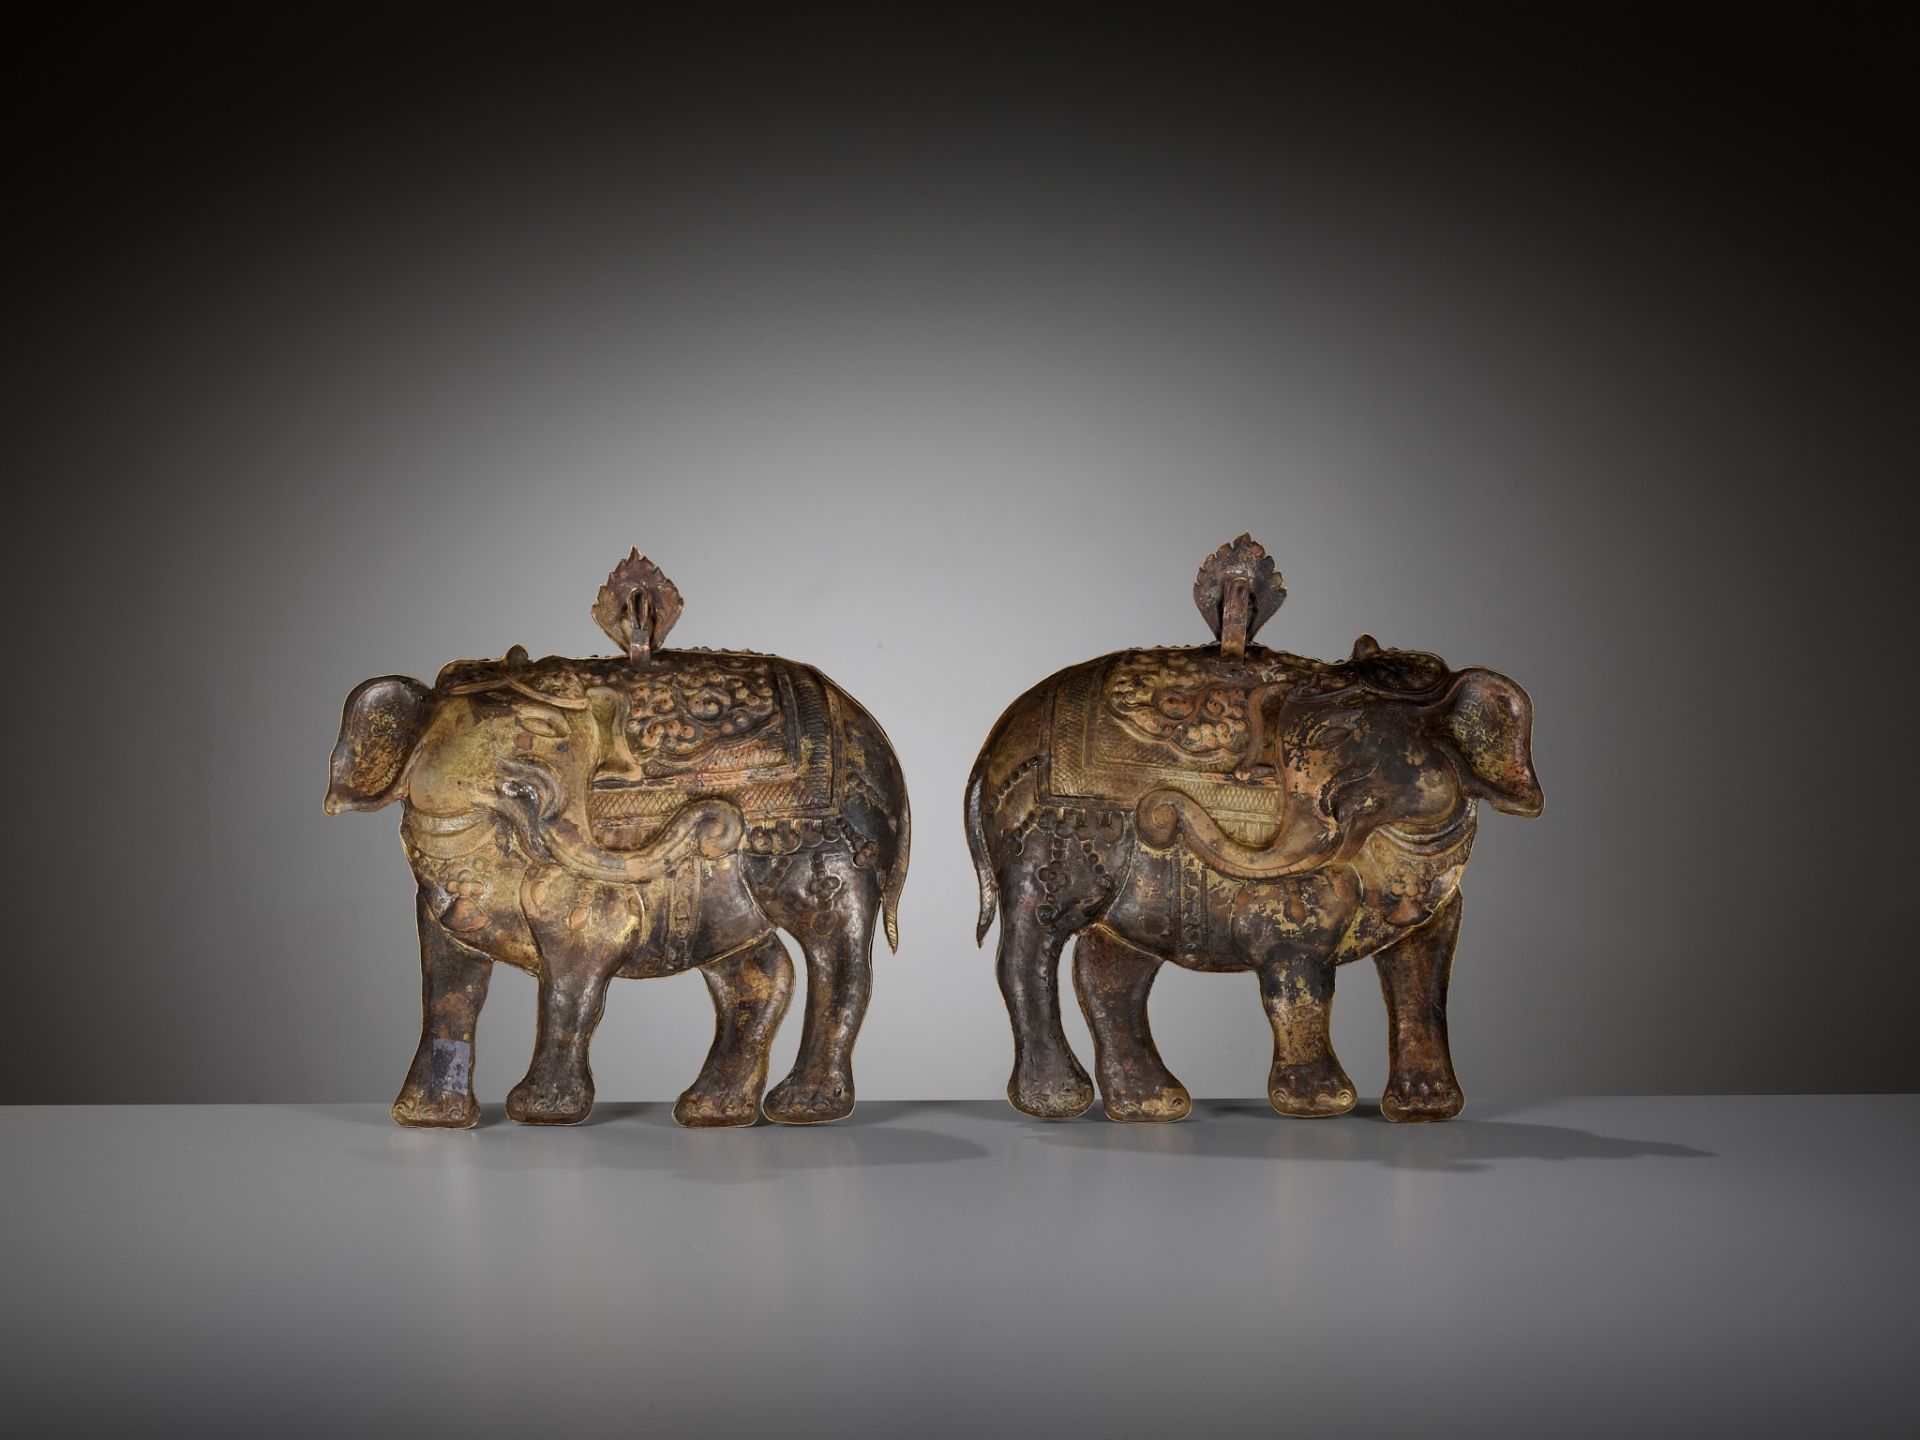 A PAIR OF GILT AND POLYCHROME-DECORATED COPPER REPOUSSE PLAQUES, HASTIRATNA, 17TH-18TH CENTURY - Image 11 of 12